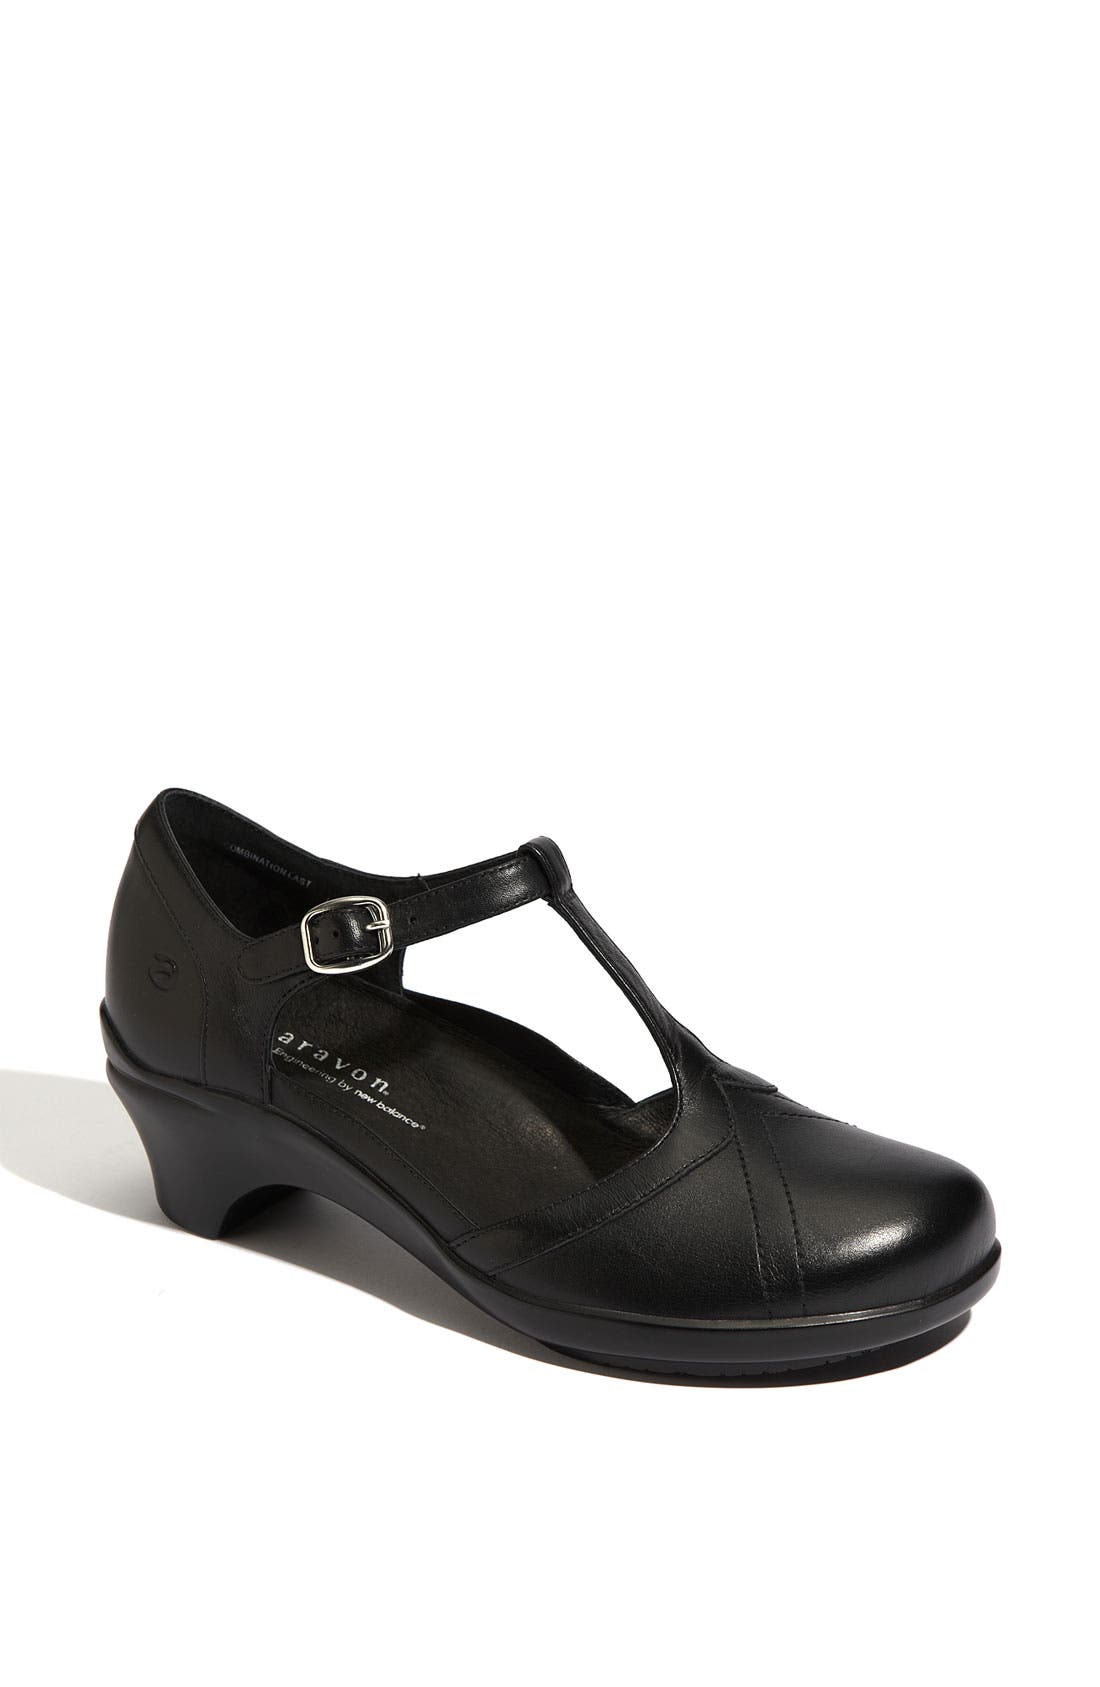 nordstrom mary janes